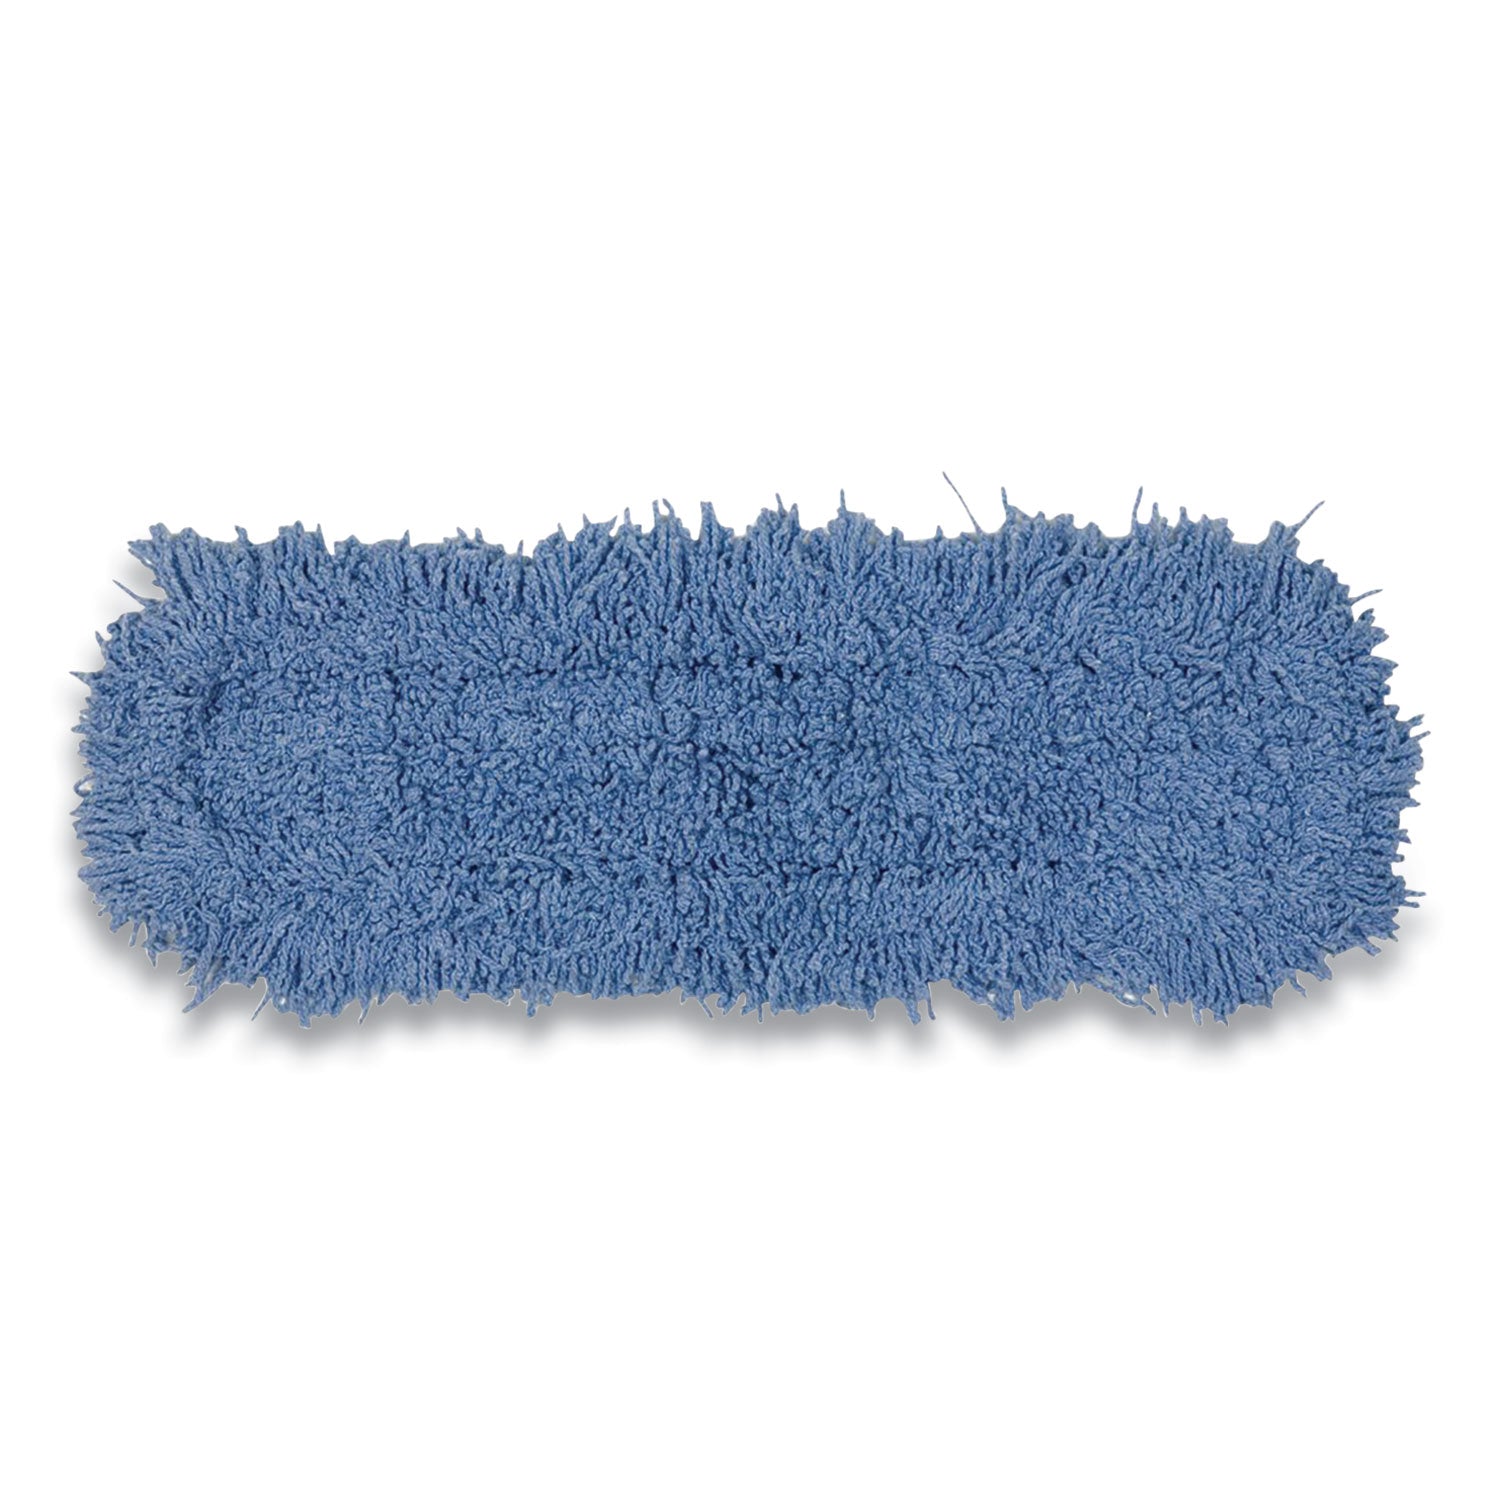 twisted-loop-blend-dust-mop-pic-pet-polyester-24-x-5-blue_rcp25300bl00 - 1